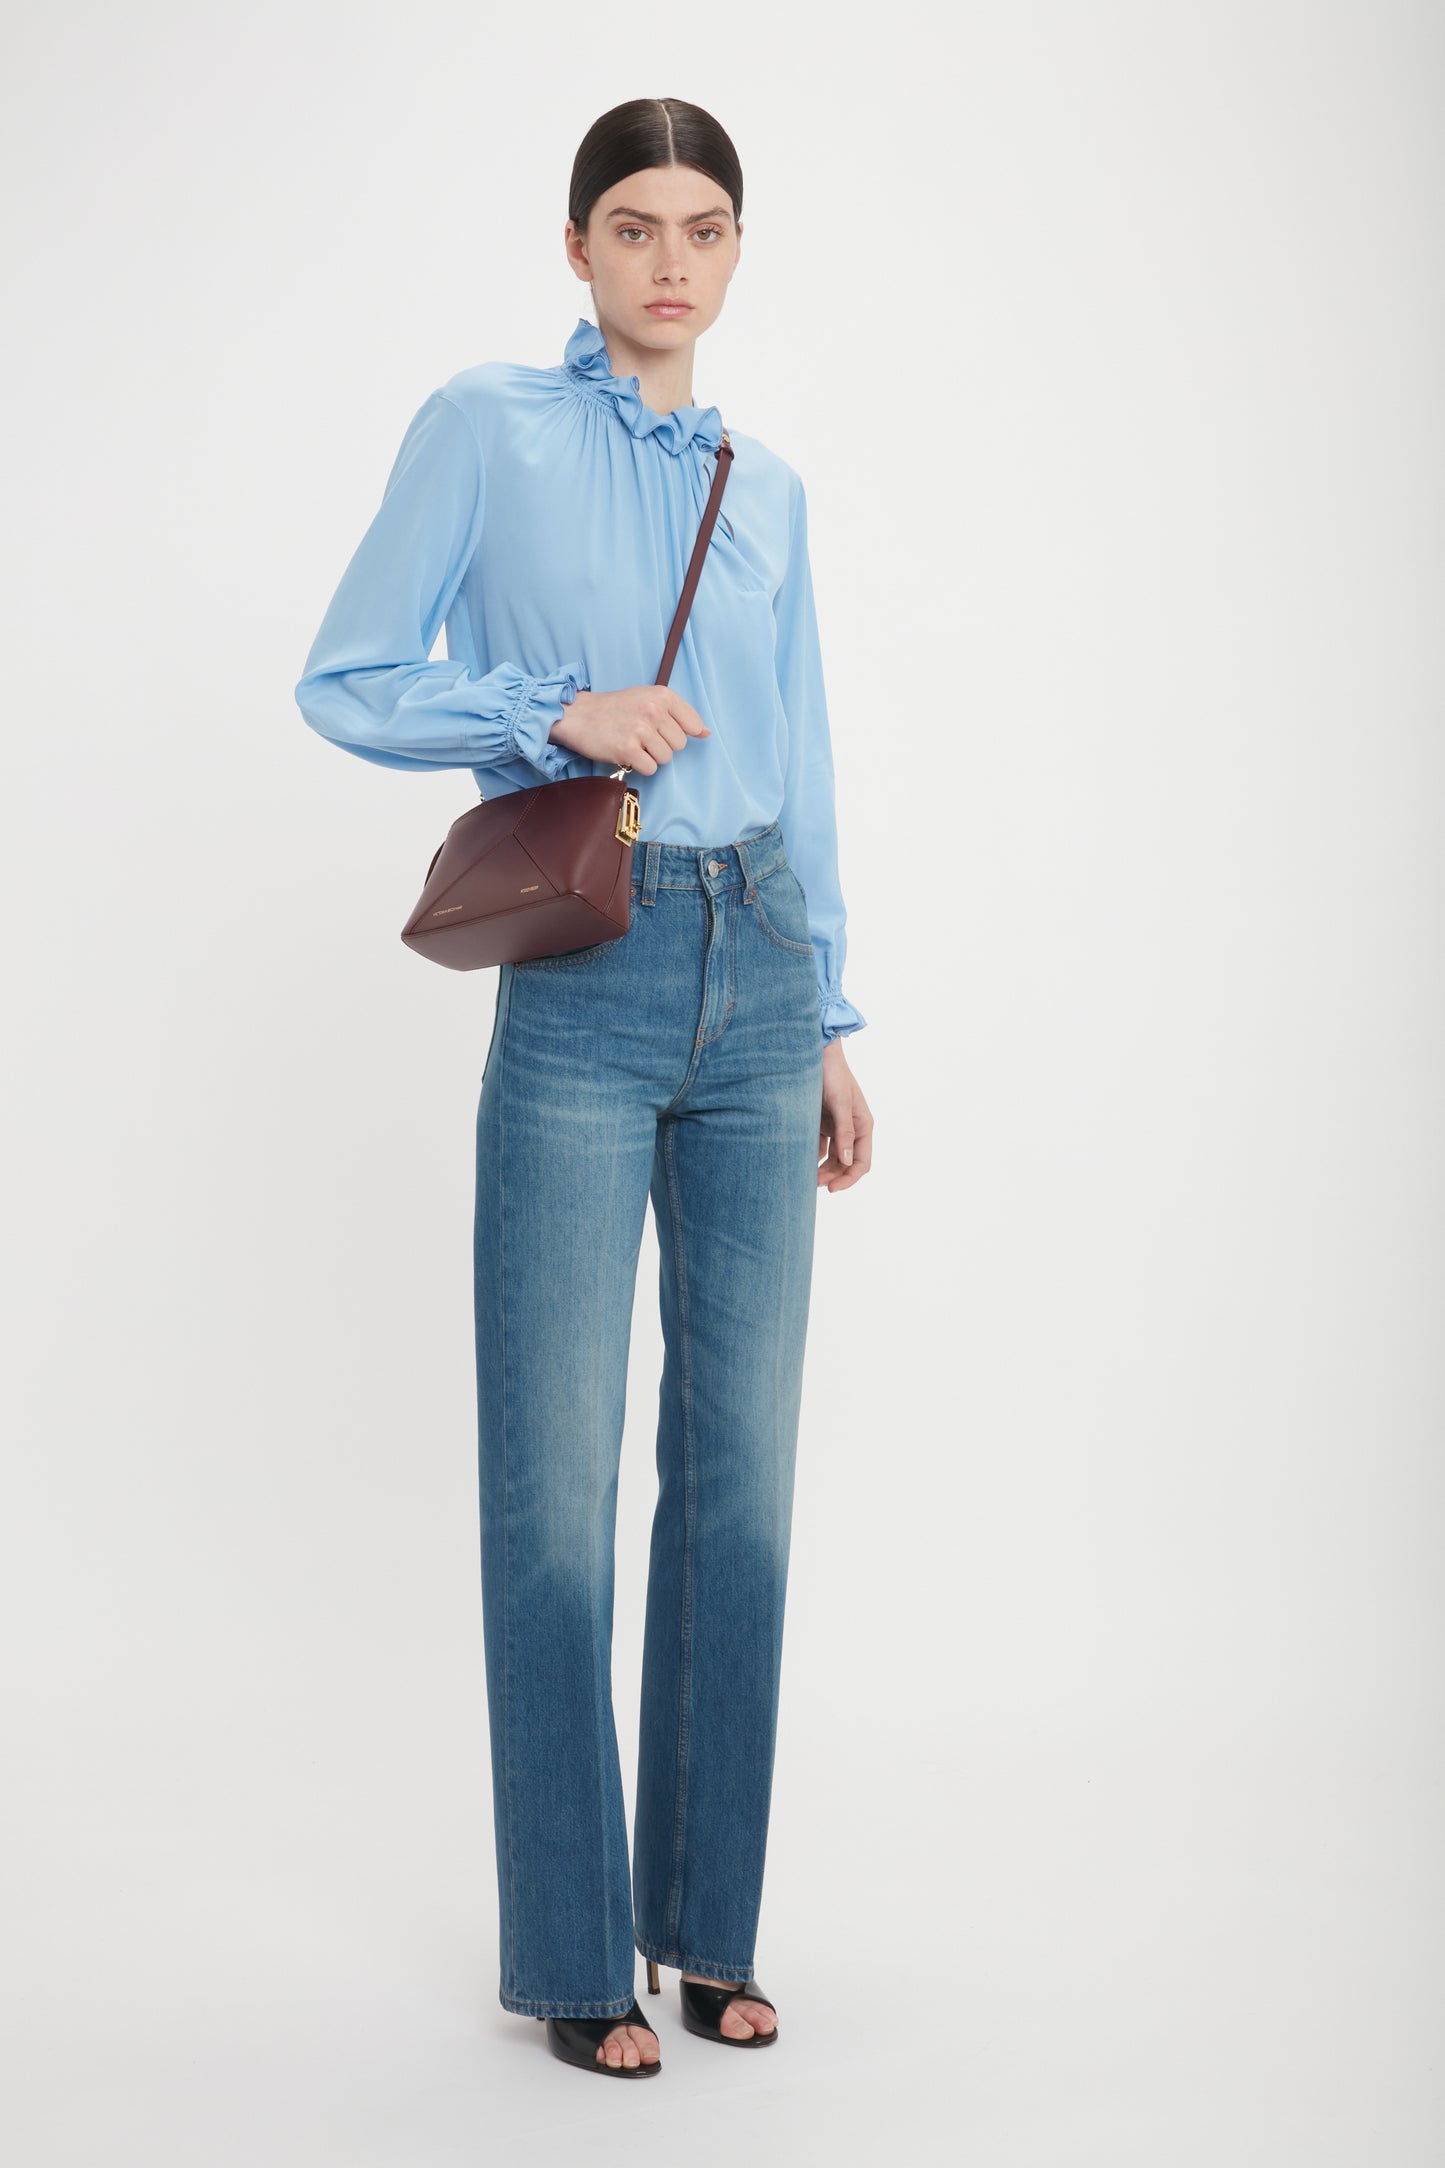 Person standing against a white background, wearing a light blue long-sleeve blouse, high-waisted blue jeans, black open-toe heels, and holding the Victoria Crossbody Bag In Burgundy Leather by Victoria Beckham.